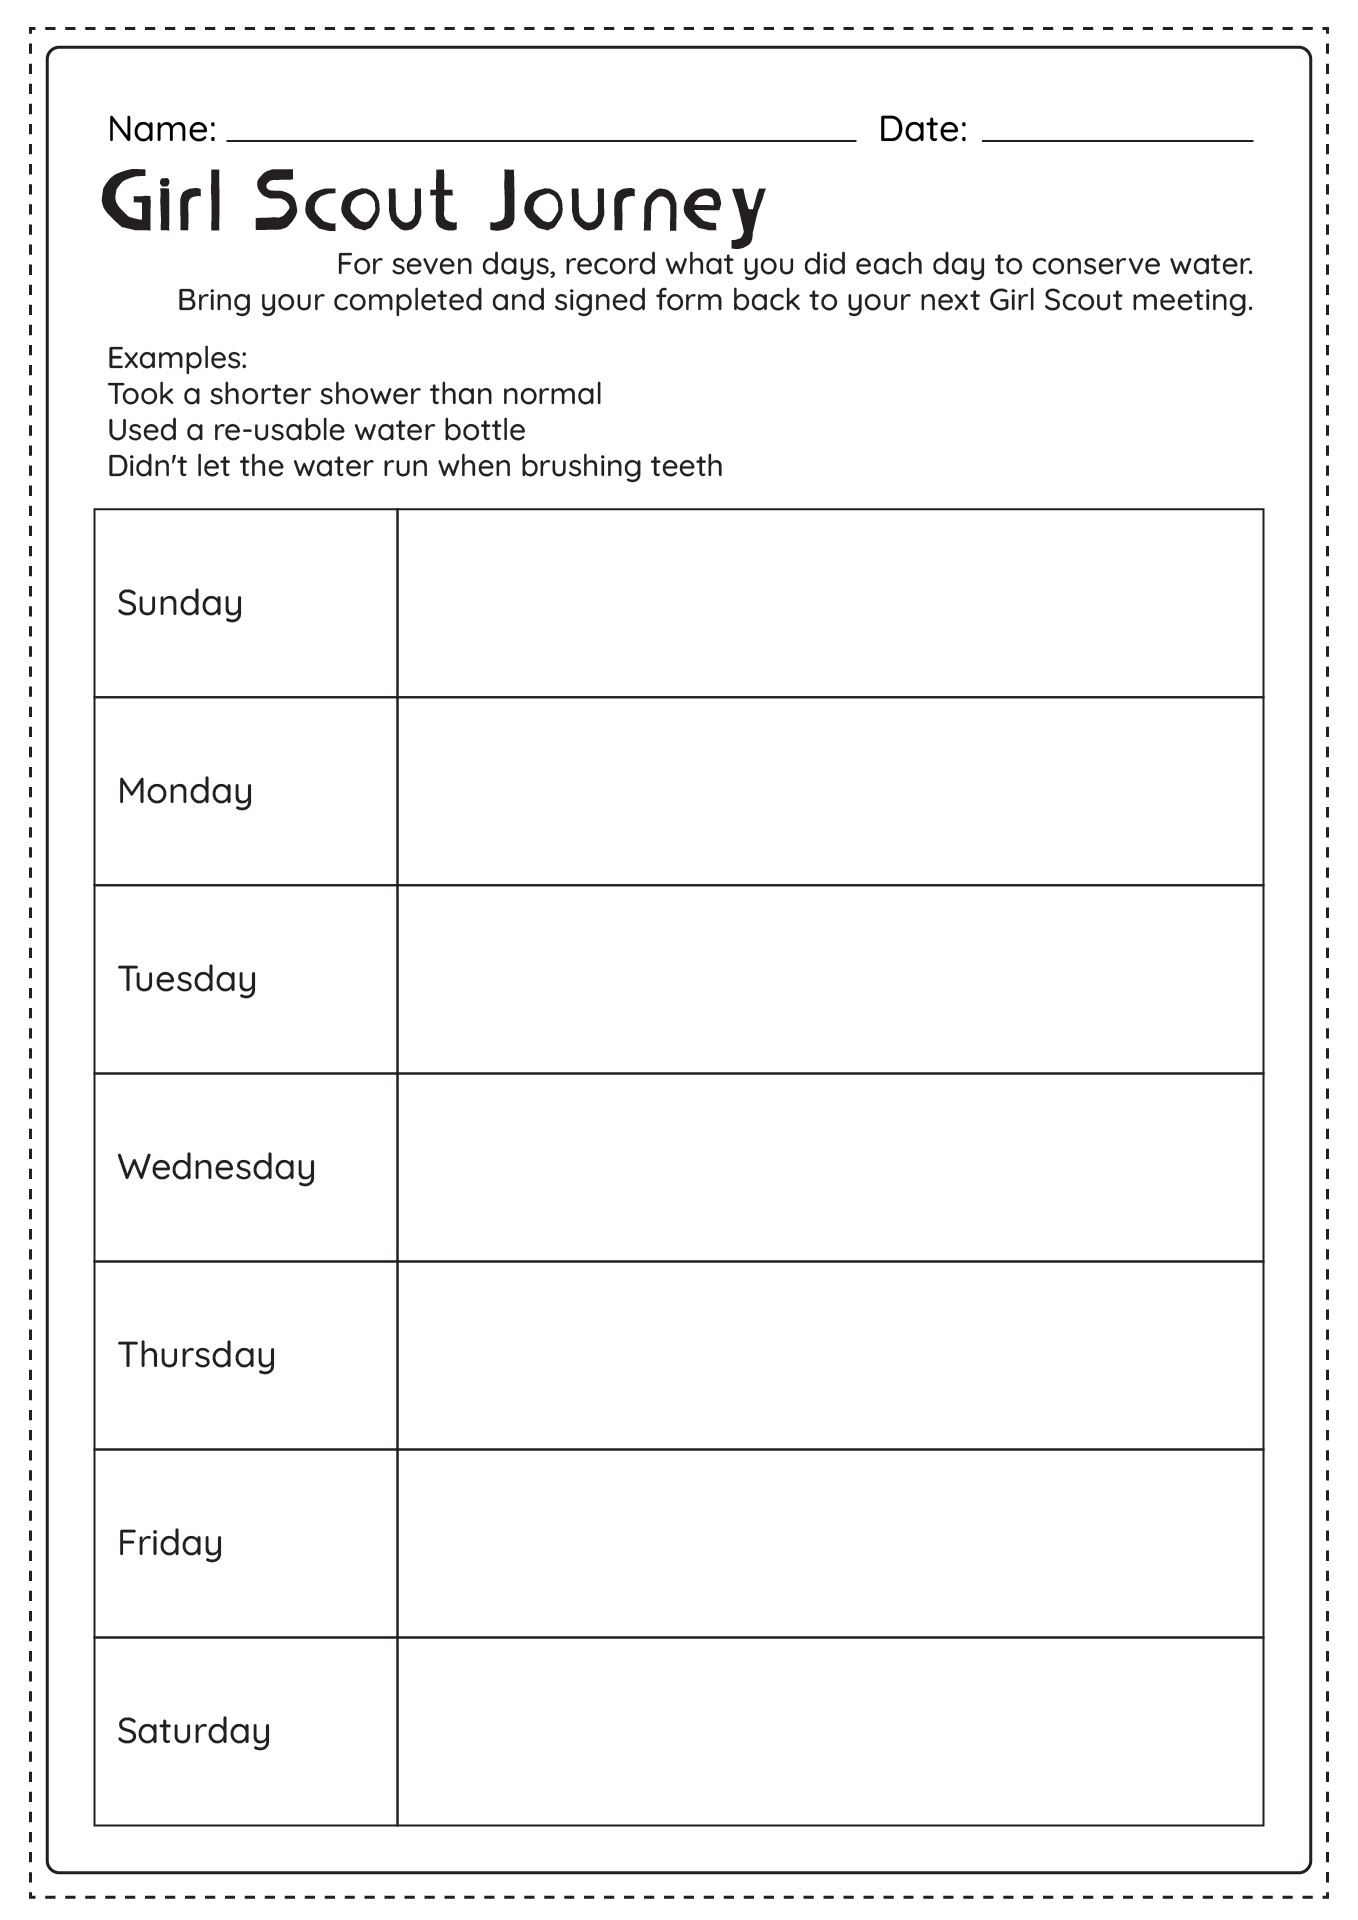 Girl Scout Journey Worksheets